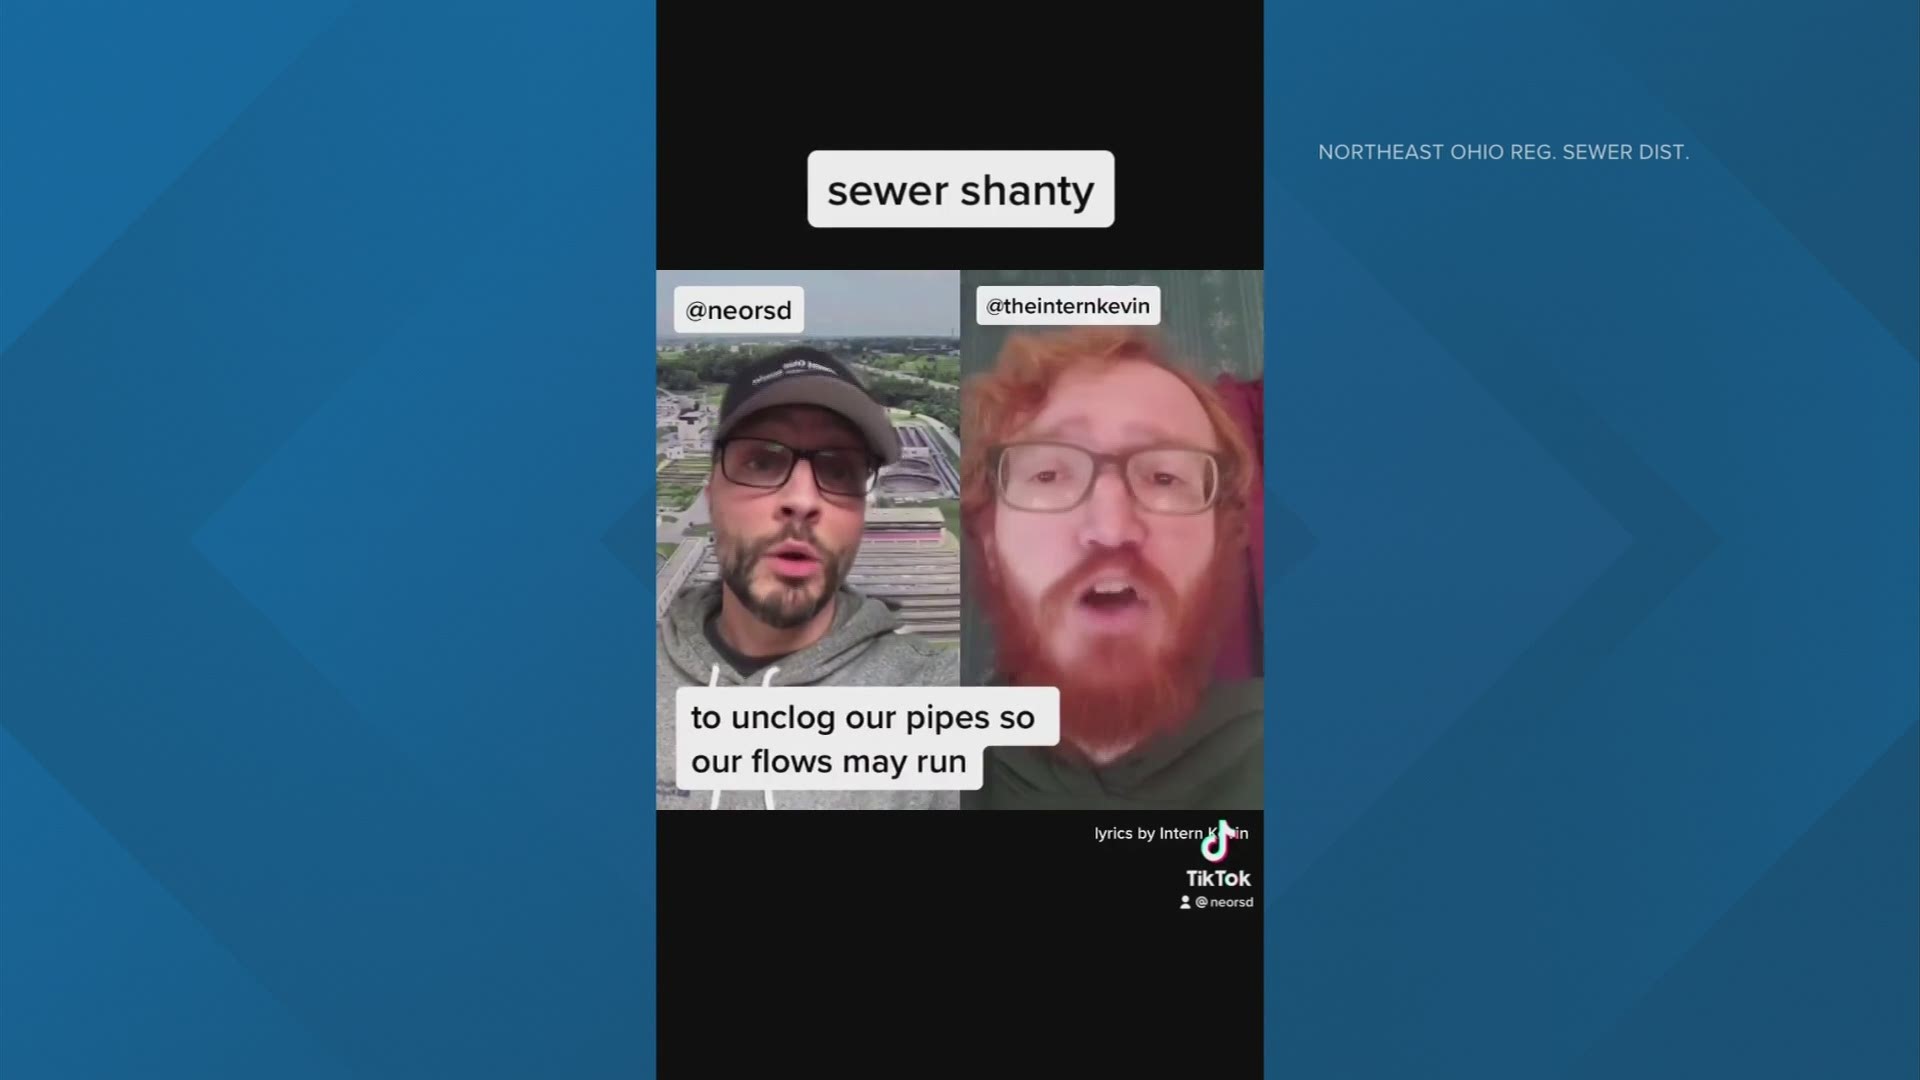 The Northeast Ohio Regional Sewer District took the “sea shanty” sing-along trend on TikTok and ran with it, with their own “sewer shanty.”